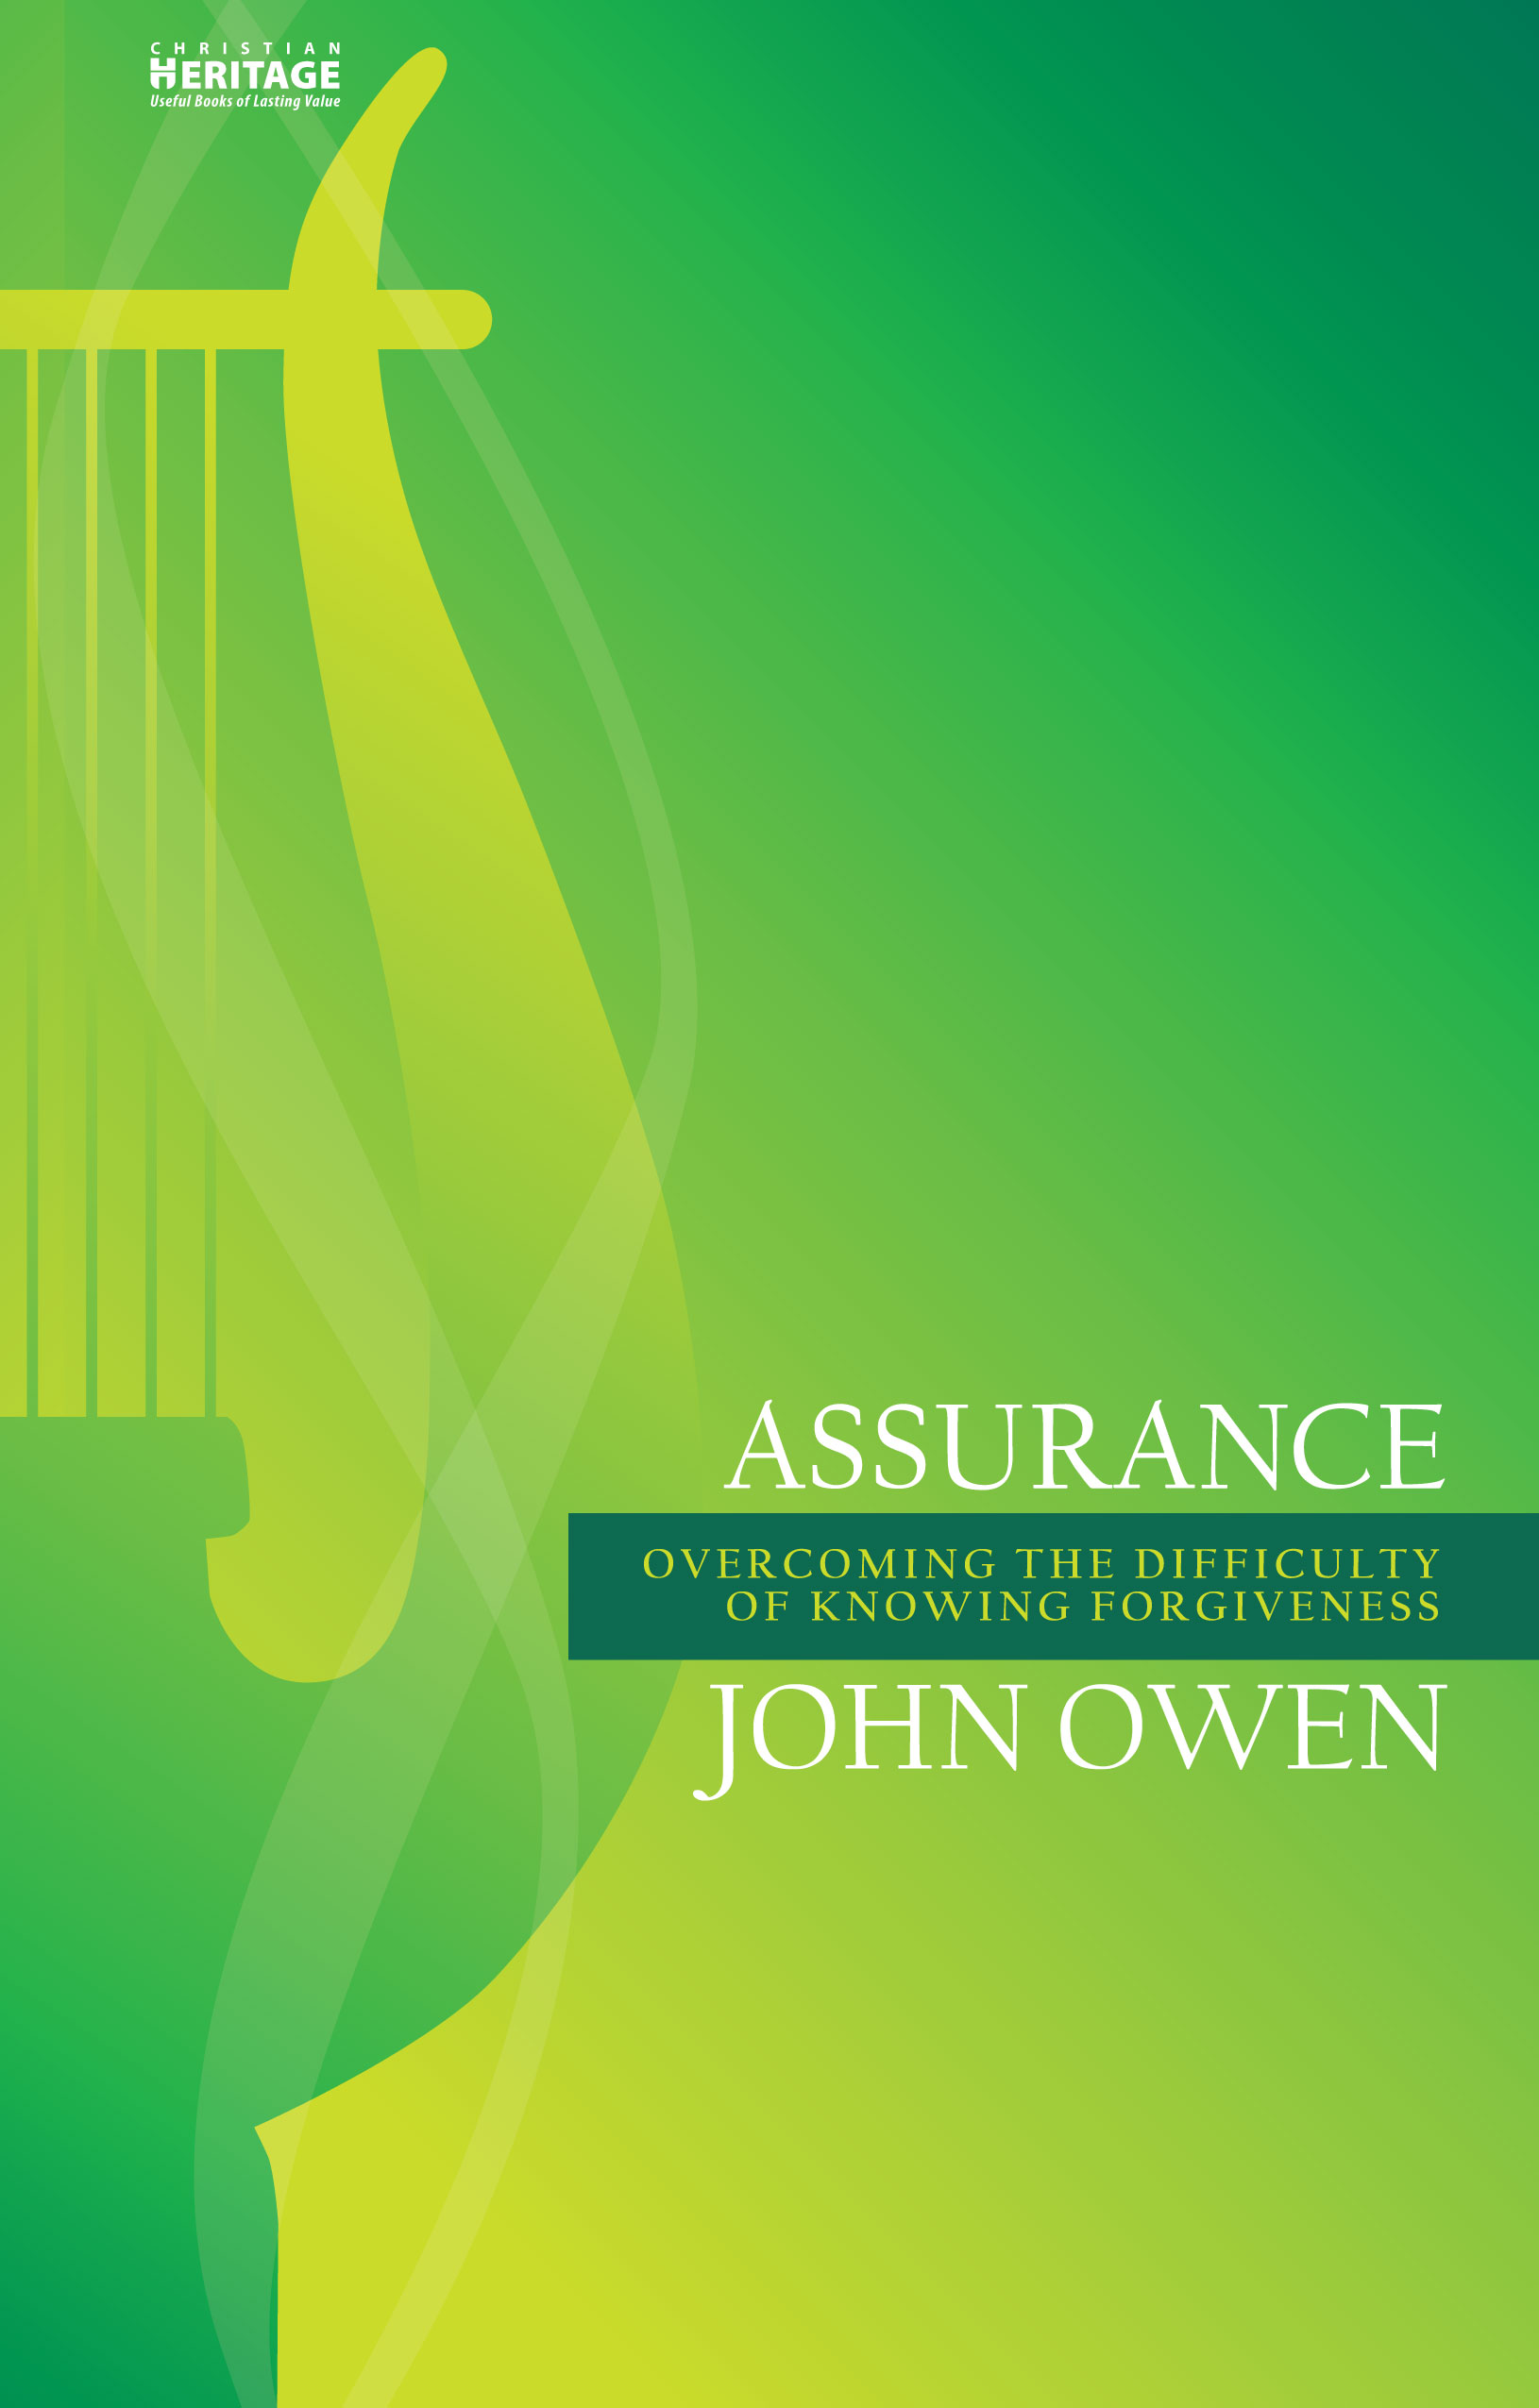 Assurance - Overcoming the Difficulty of Knowing Forgiveness